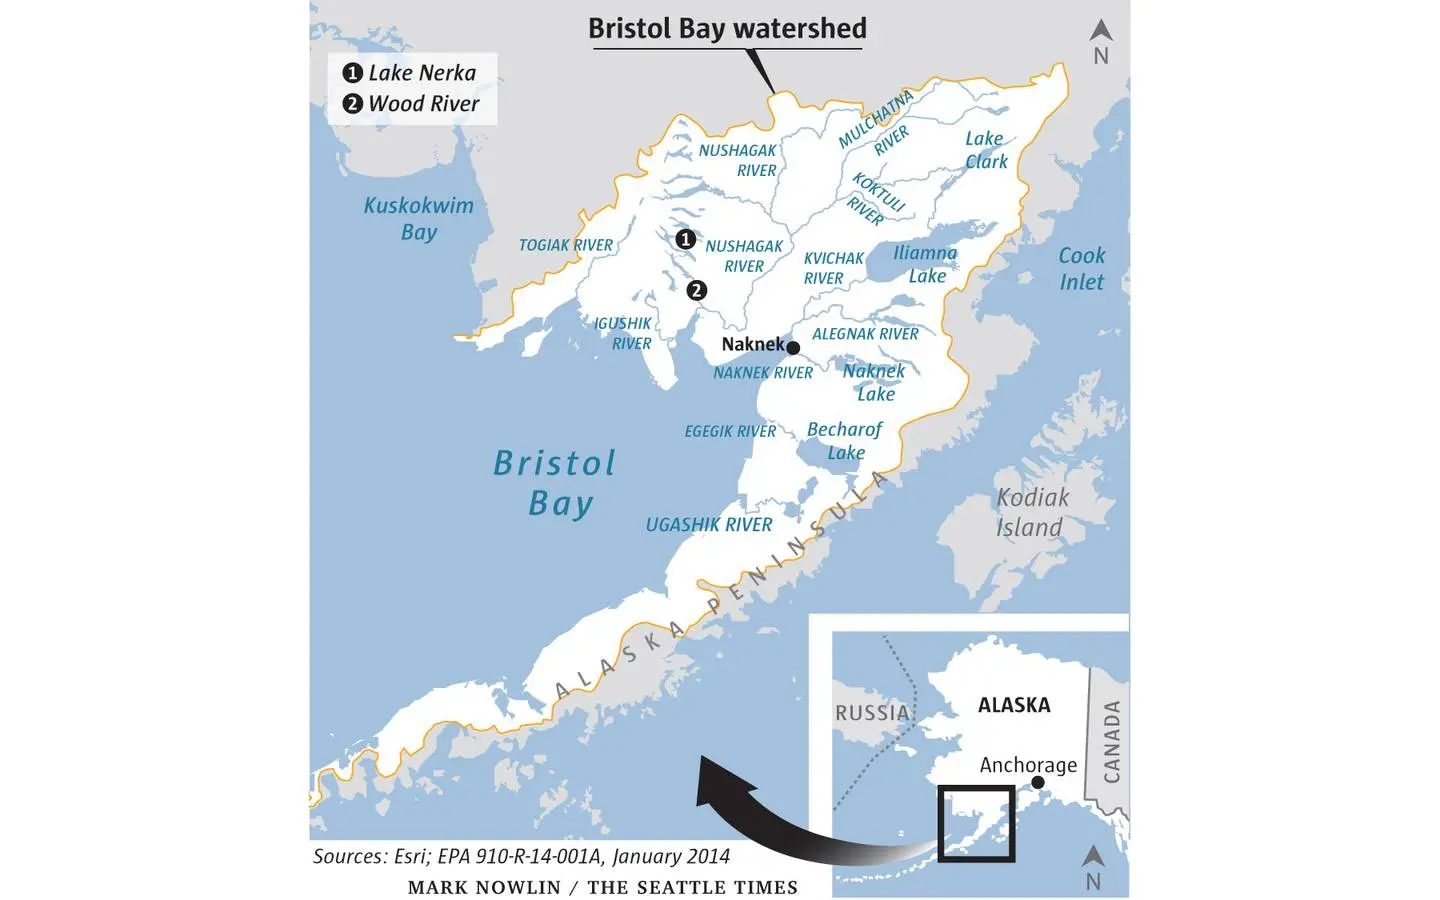 Bristol Bay Watershed map in southern Alaska showing the Alaskan peninsula and the main river and lake systems that make up the salmon's breeding habitat. Lake Nerka, Wood River, and the Naknek settlement are prominent on the map. 